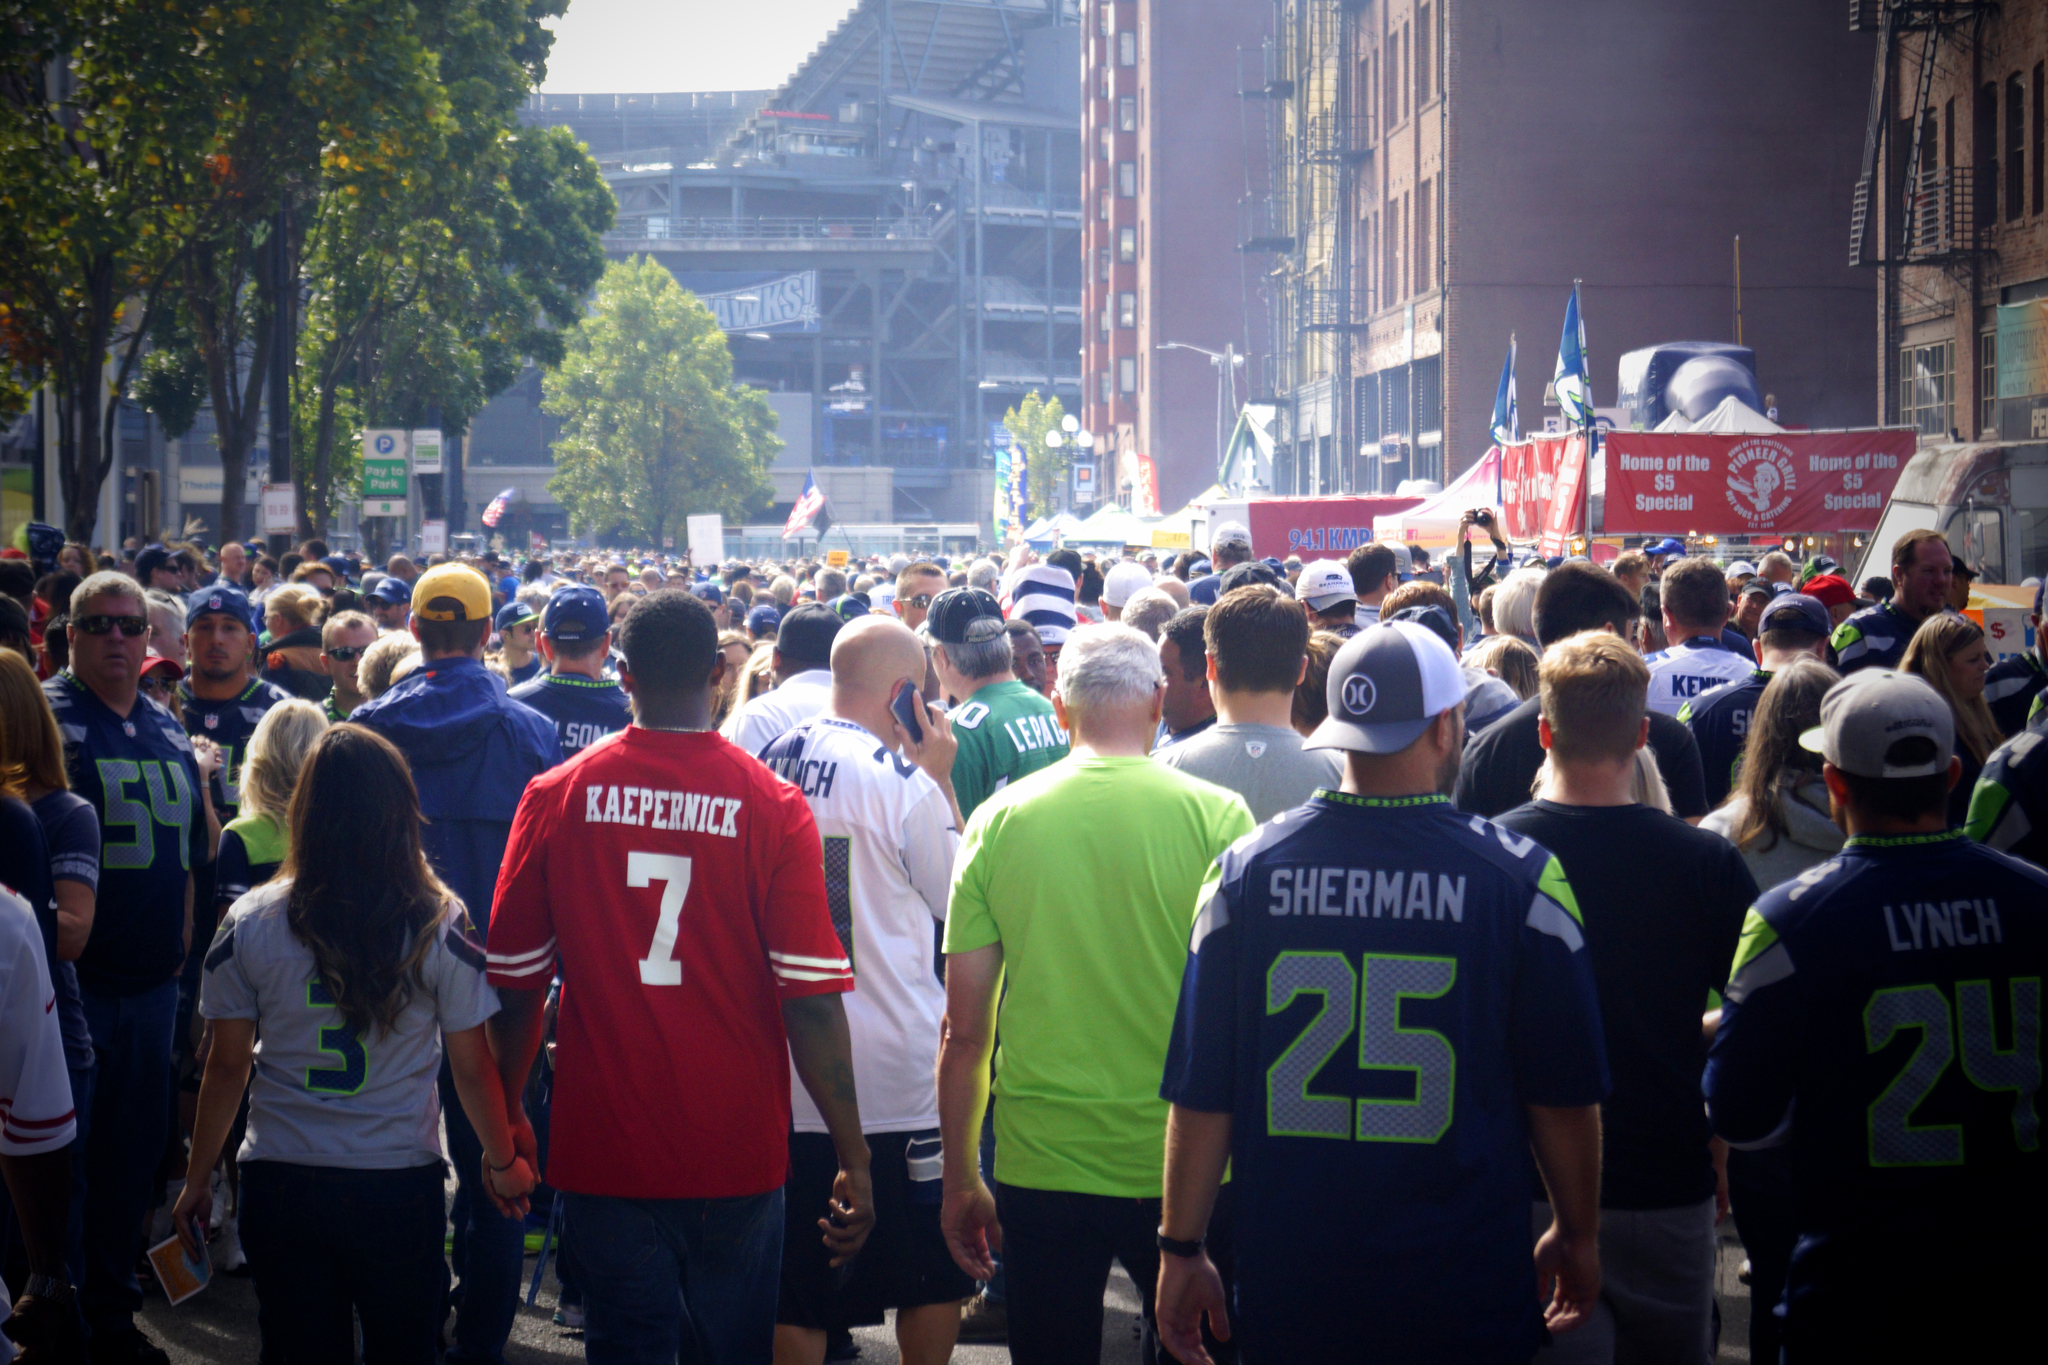 A Kaepernick jersey stands out from the crowd outside CenturyLink on Sunday. Photo by Christopher Zeuthen